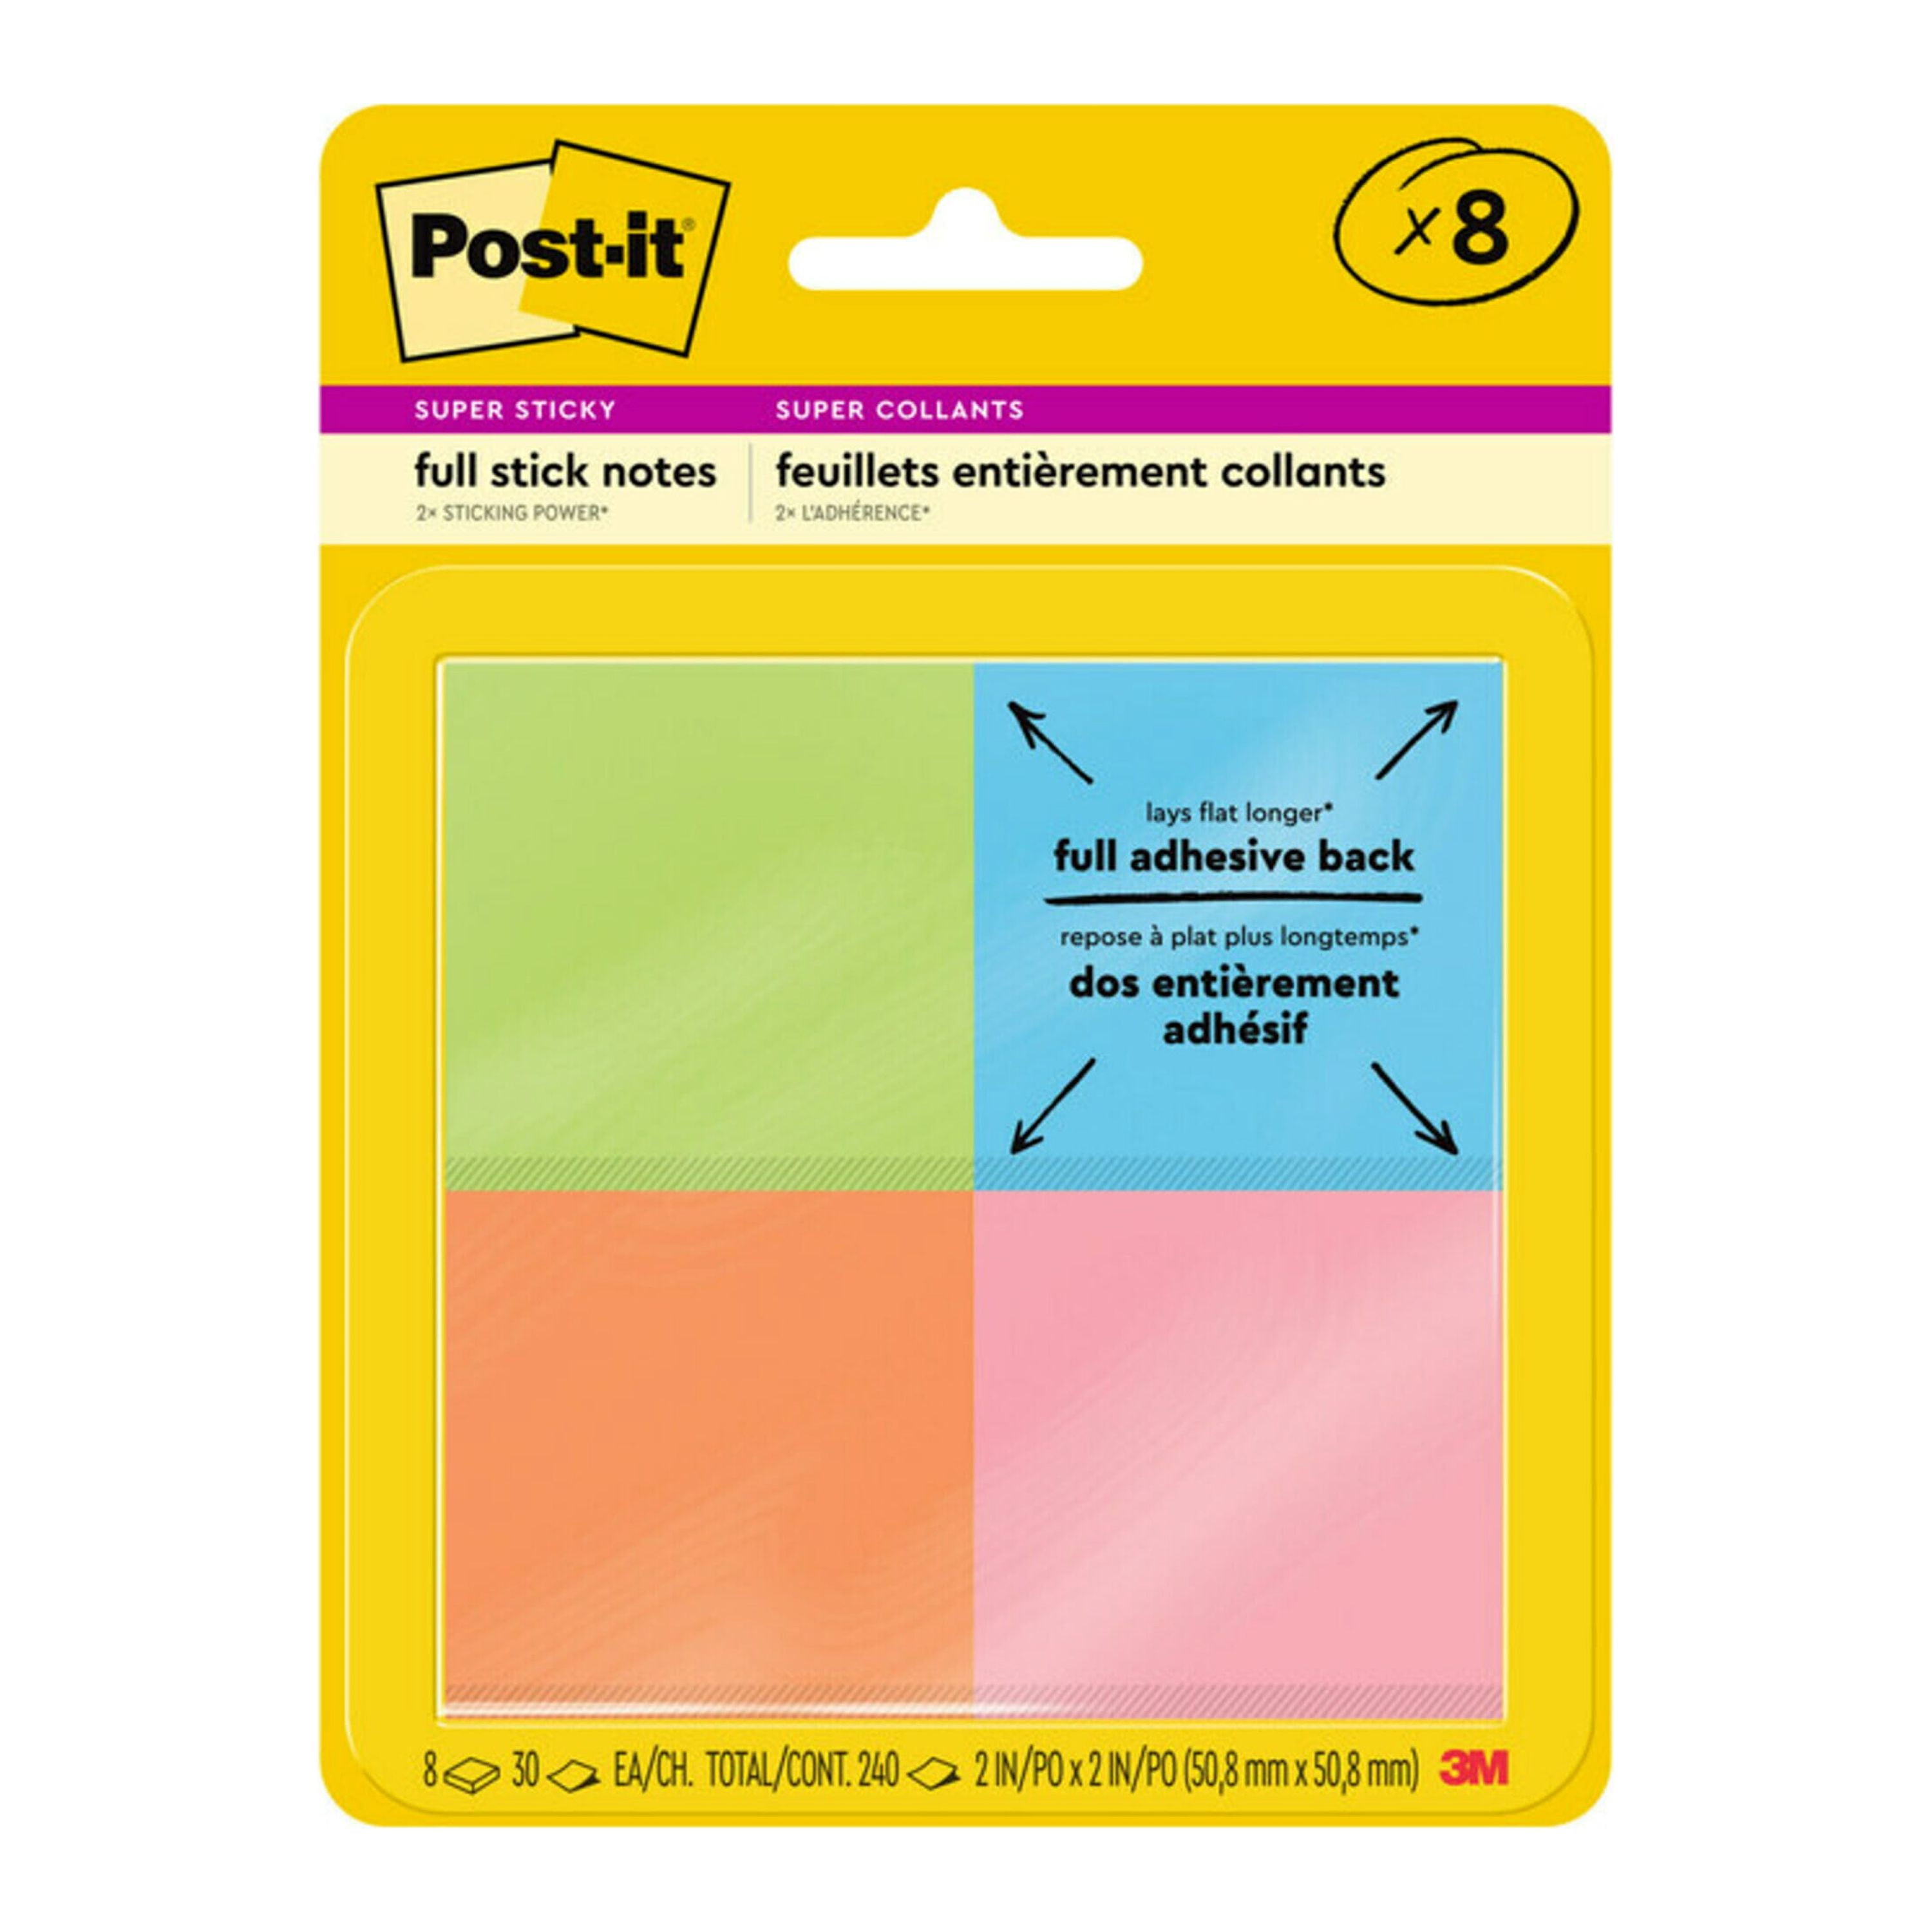 Pompotops School Supplies 50 Sheets Sticky Notes Transparent Transparent  Paper Clear Sticky Notes Memo Self-Adhesive Notebook Notepaper Insert For